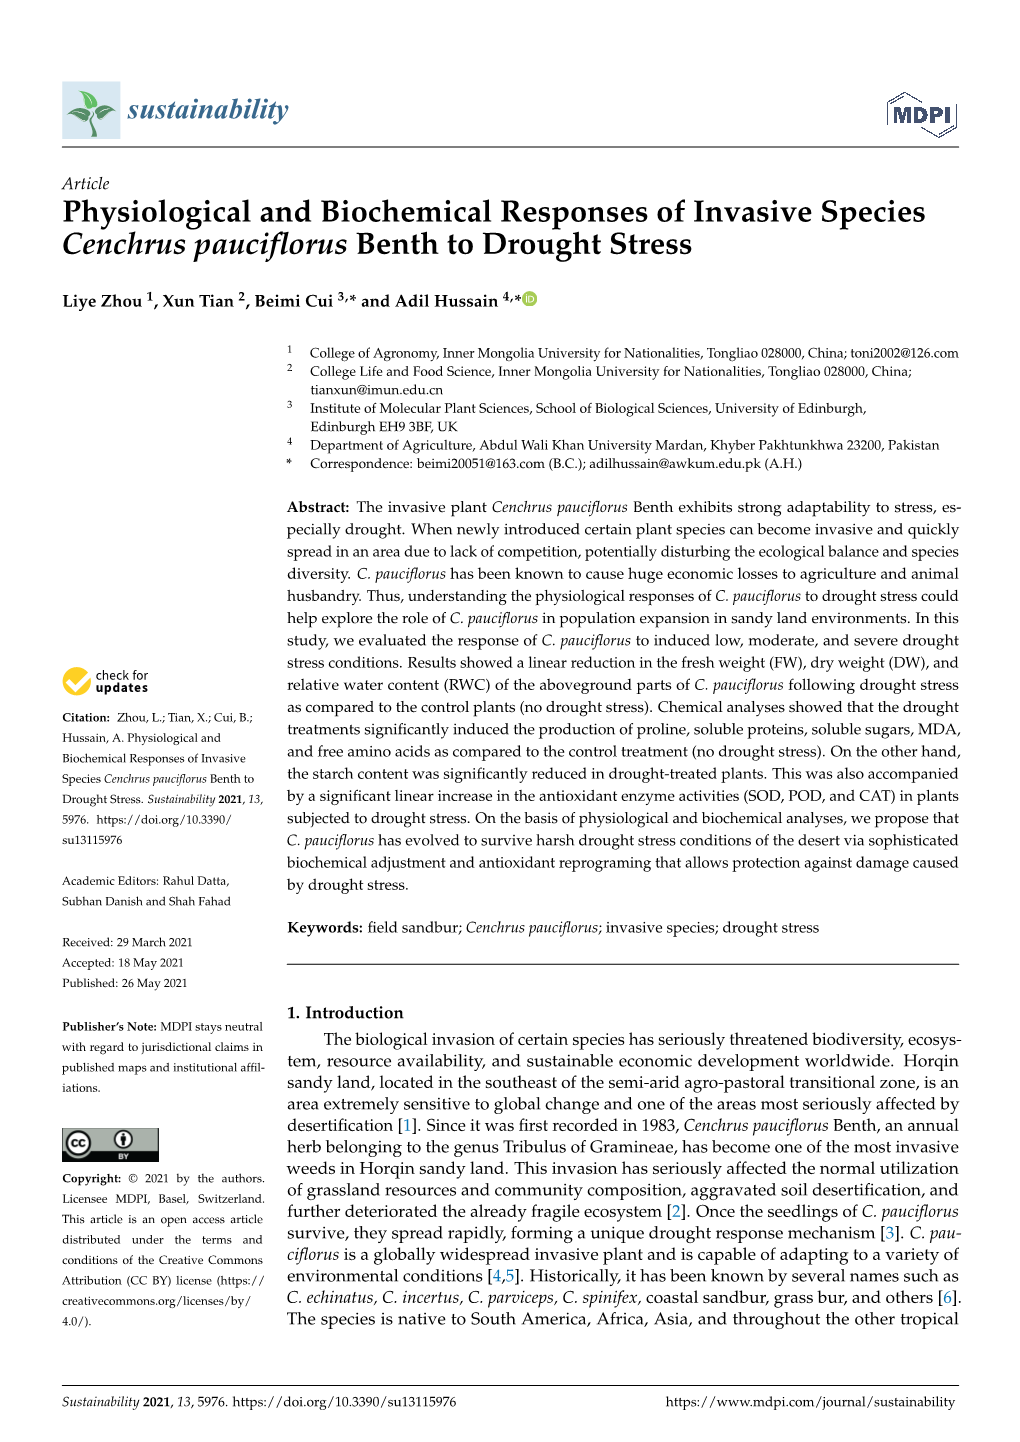 Physiological and Biochemical Responses of Invasive Species Cenchrus Pauciﬂorus Benth to Drought Stress